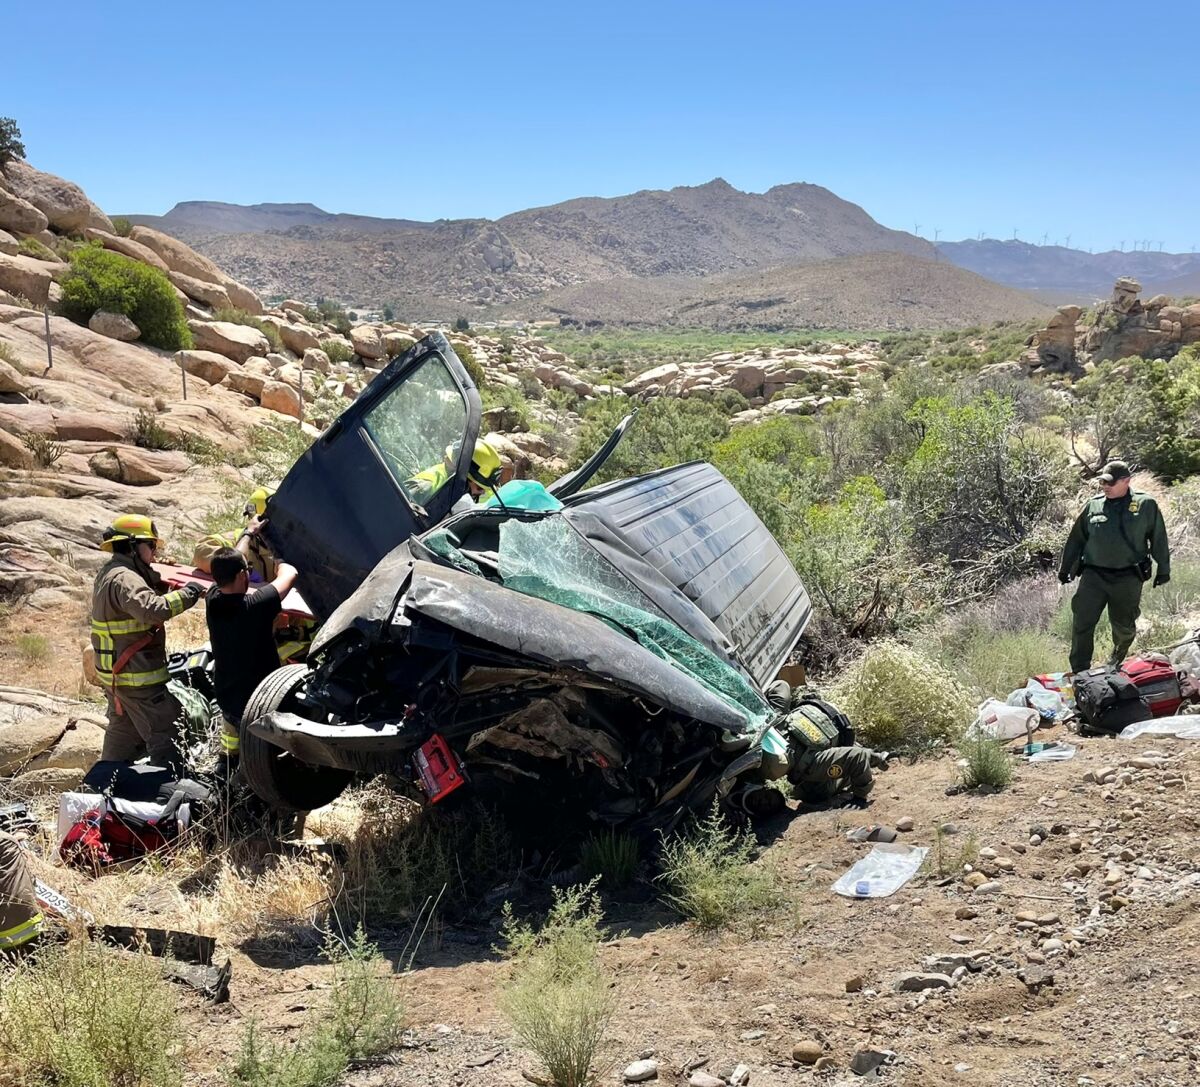 Authorities inspect the wreckage of a vehicle near boulders in a desert area 